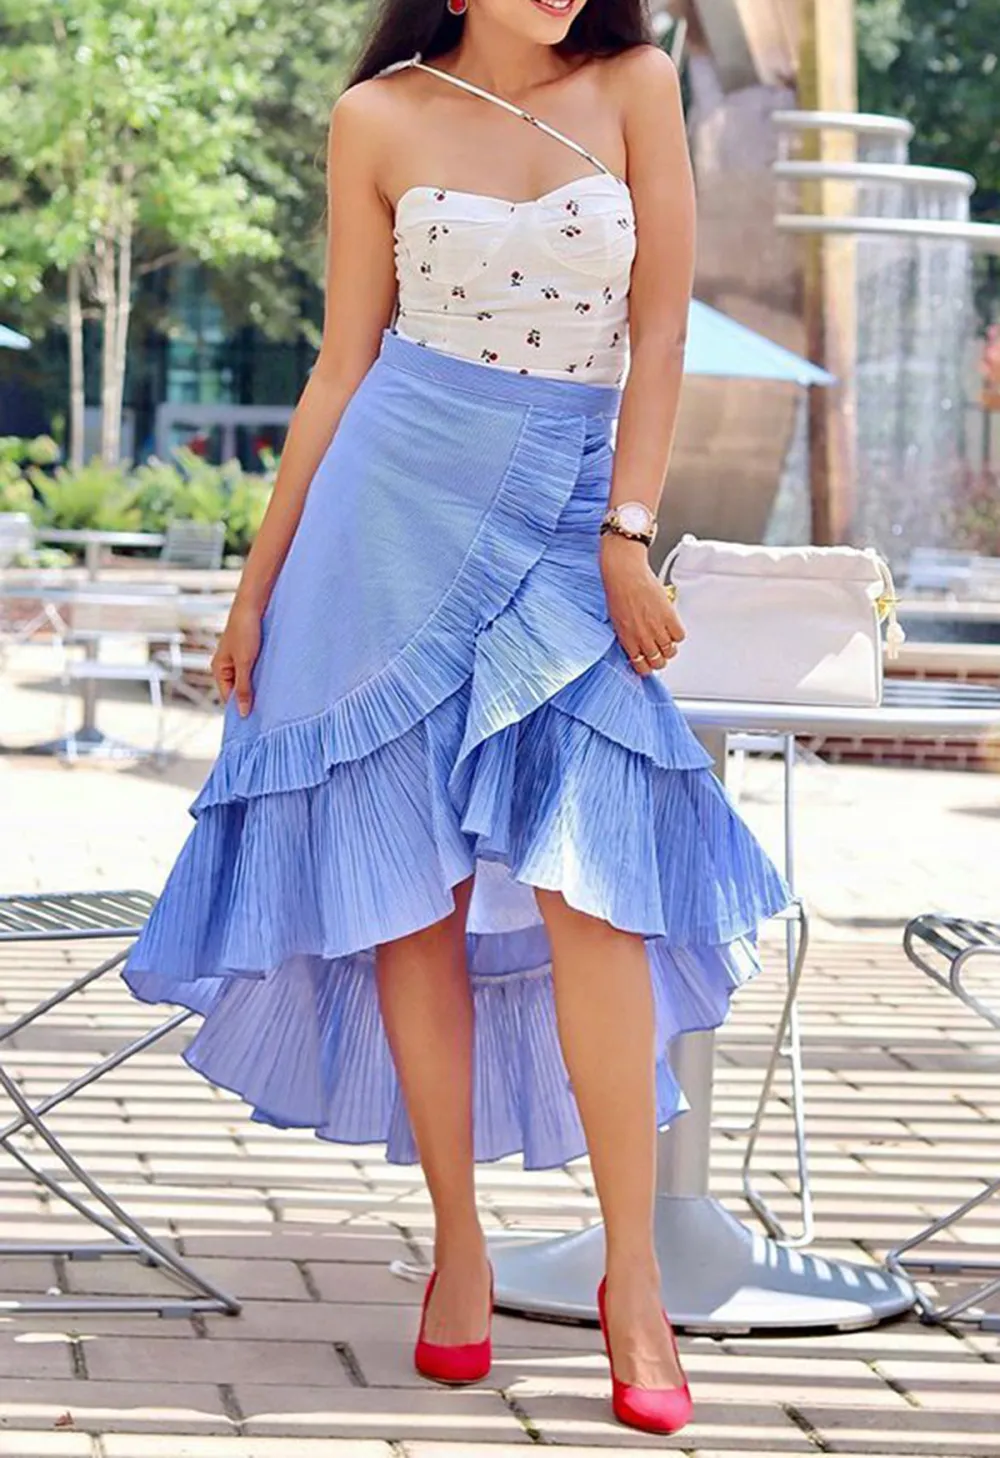 APPLAUSE OF RUFFLE TIERED FRILL HEM SKIRT IN BLUE STRIPES